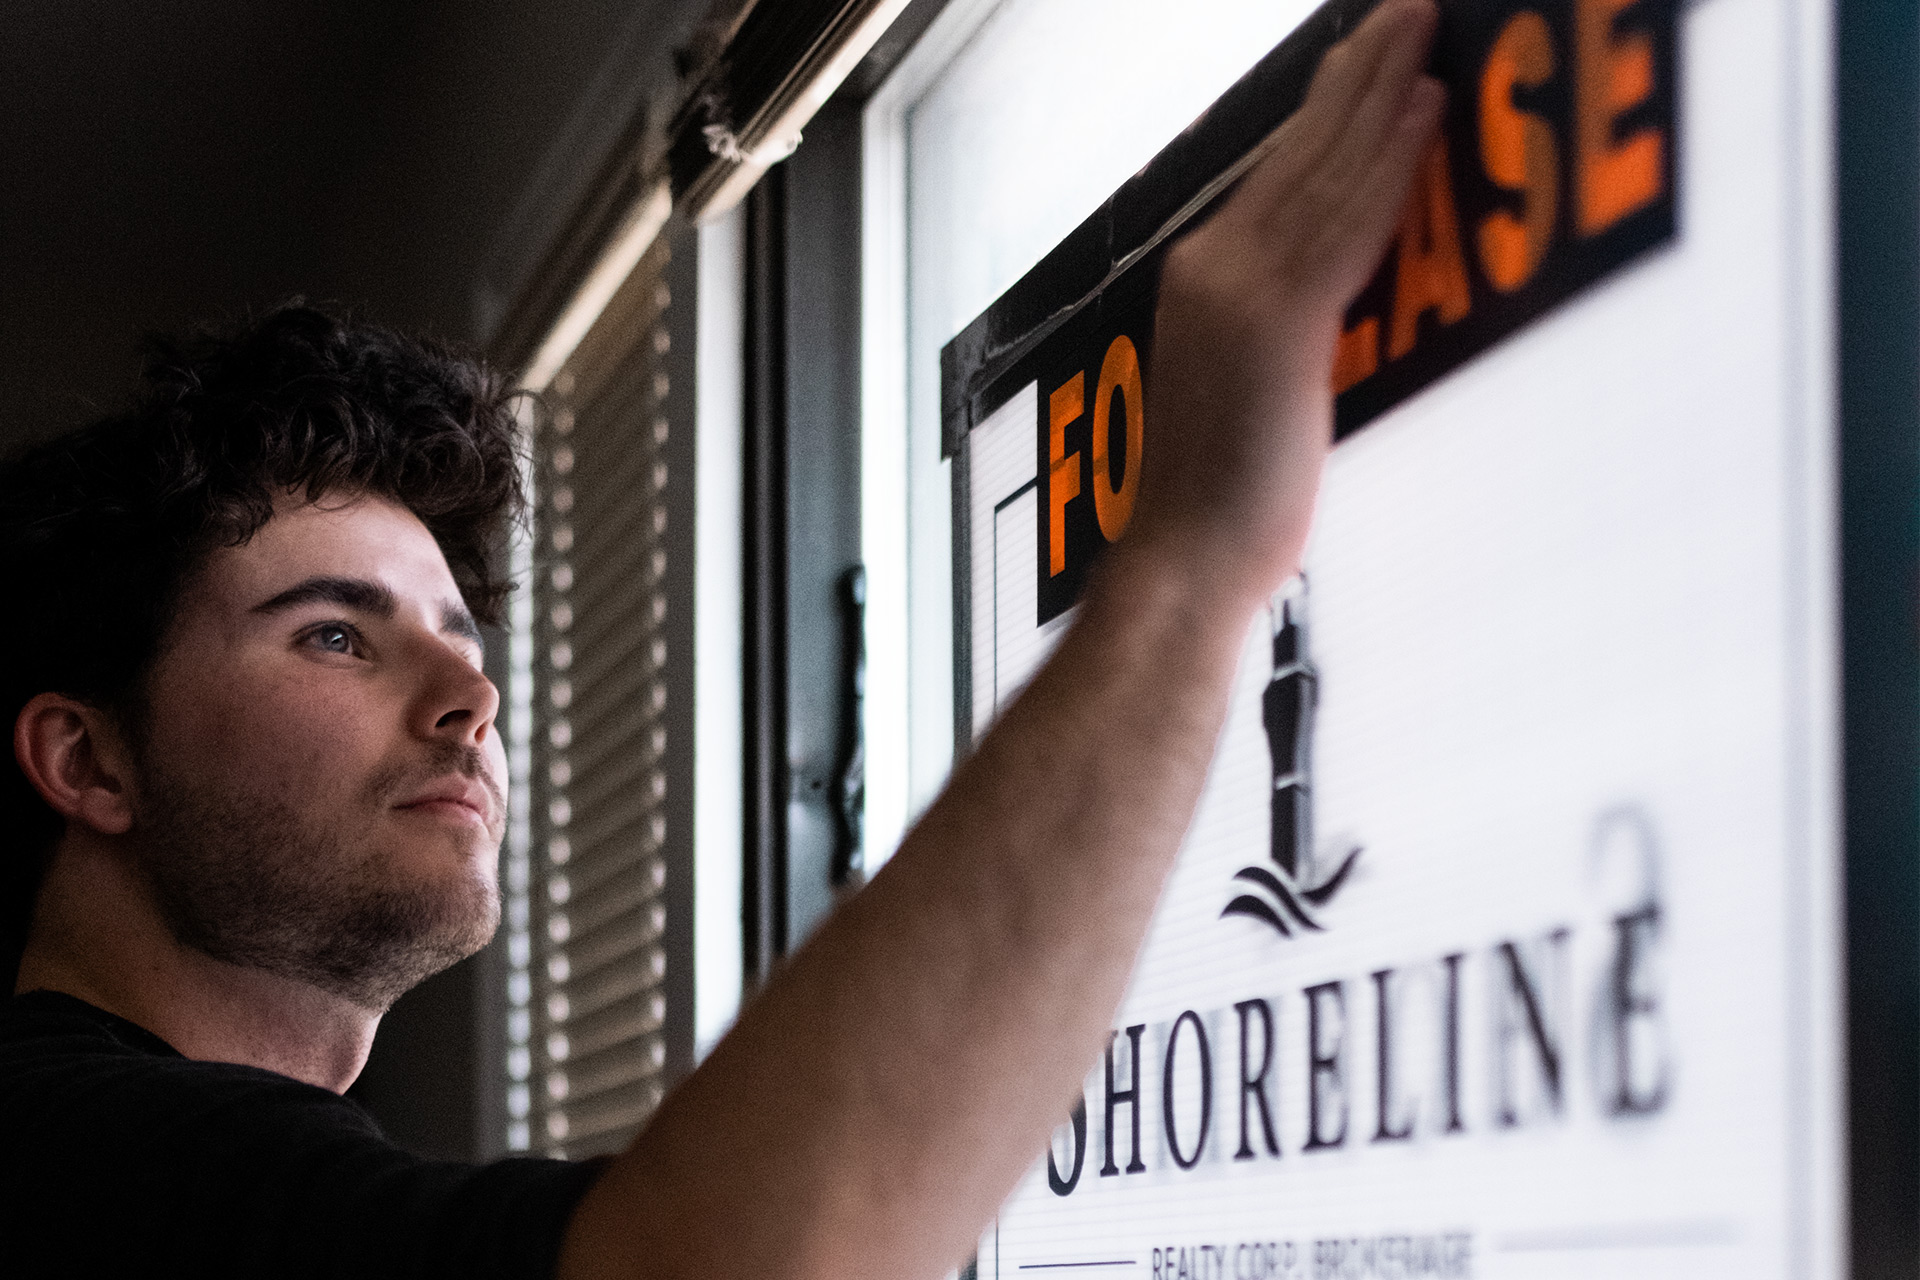 An image of Marco Pedri - Broker with Shoreline Realty Corp., Brokerage changing a "For Lease" sign to "Leased".